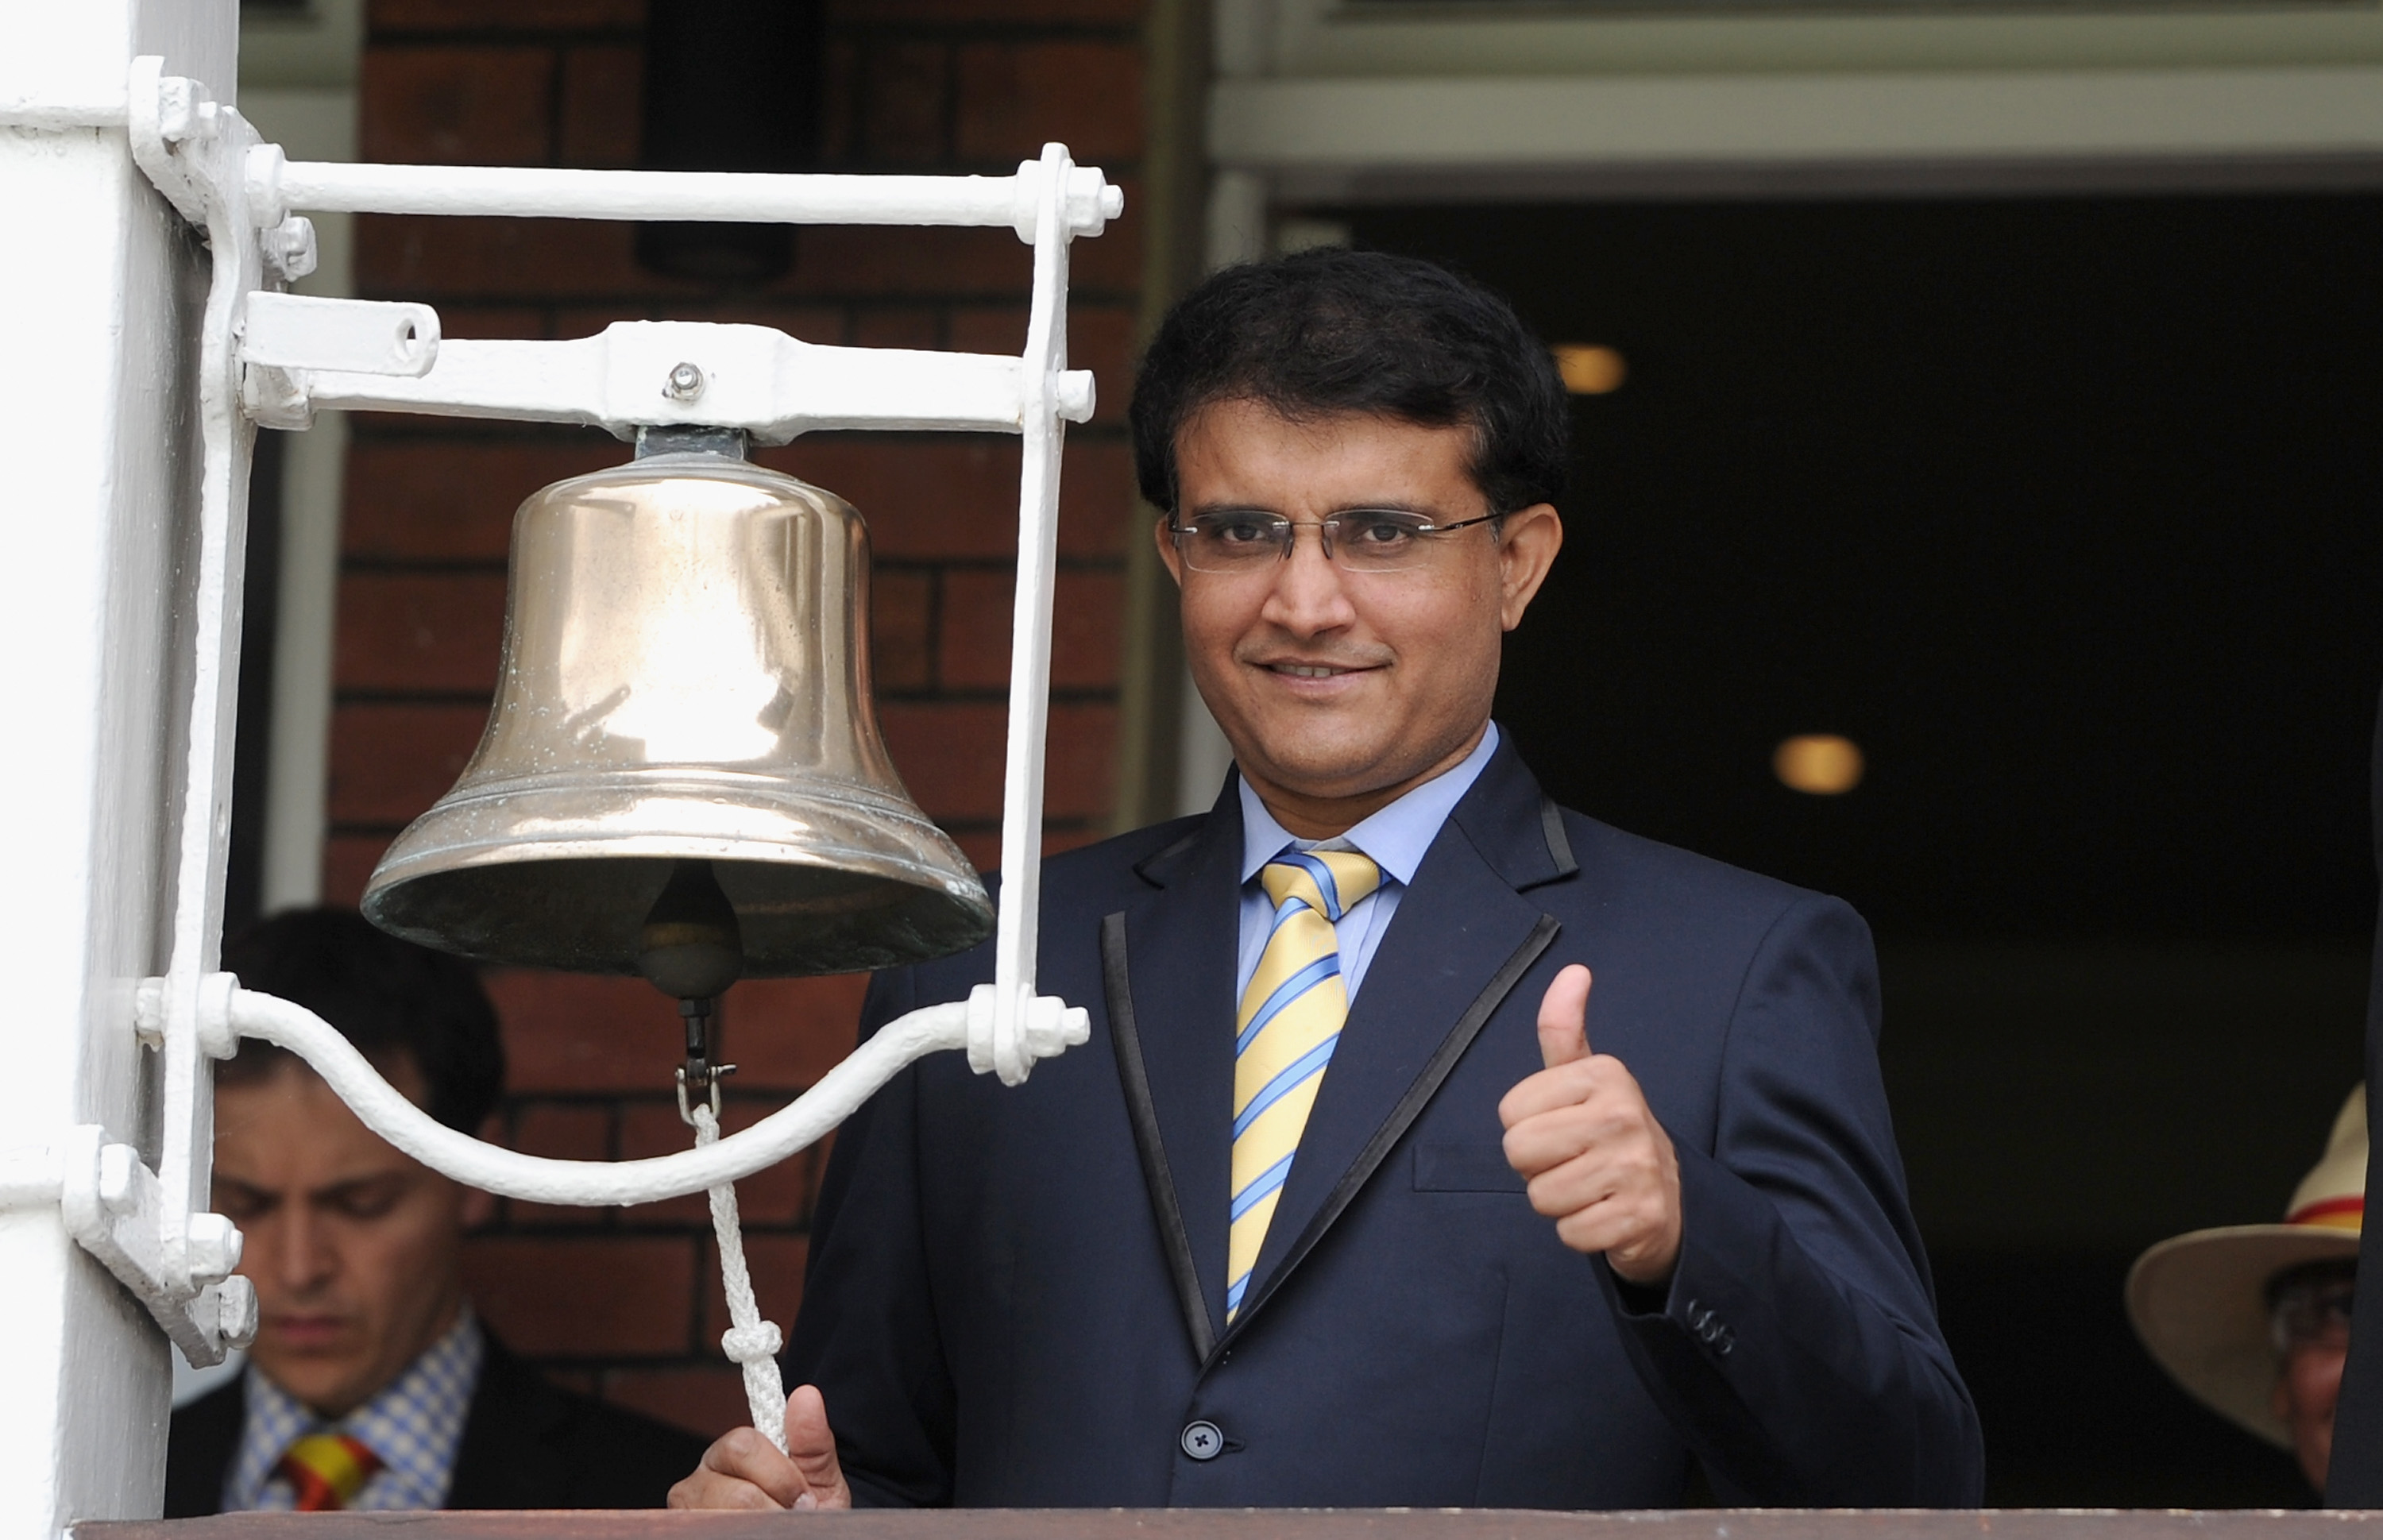 Sourav Ganguly best contender to be ICC President, believes Graeme Smith